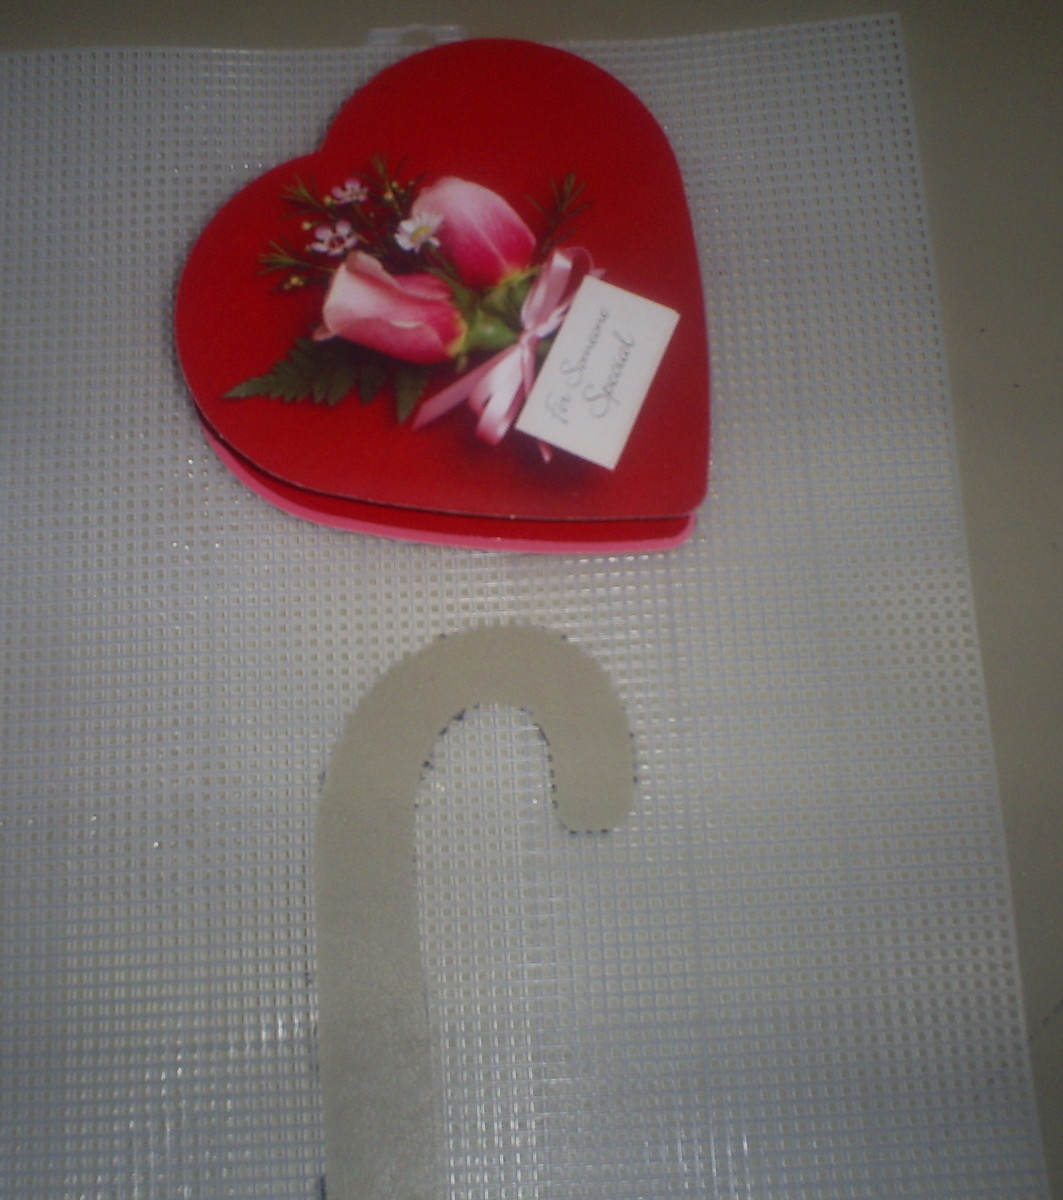 Find a plastic canvas mesh and heart shaped candy box as the template for this project.